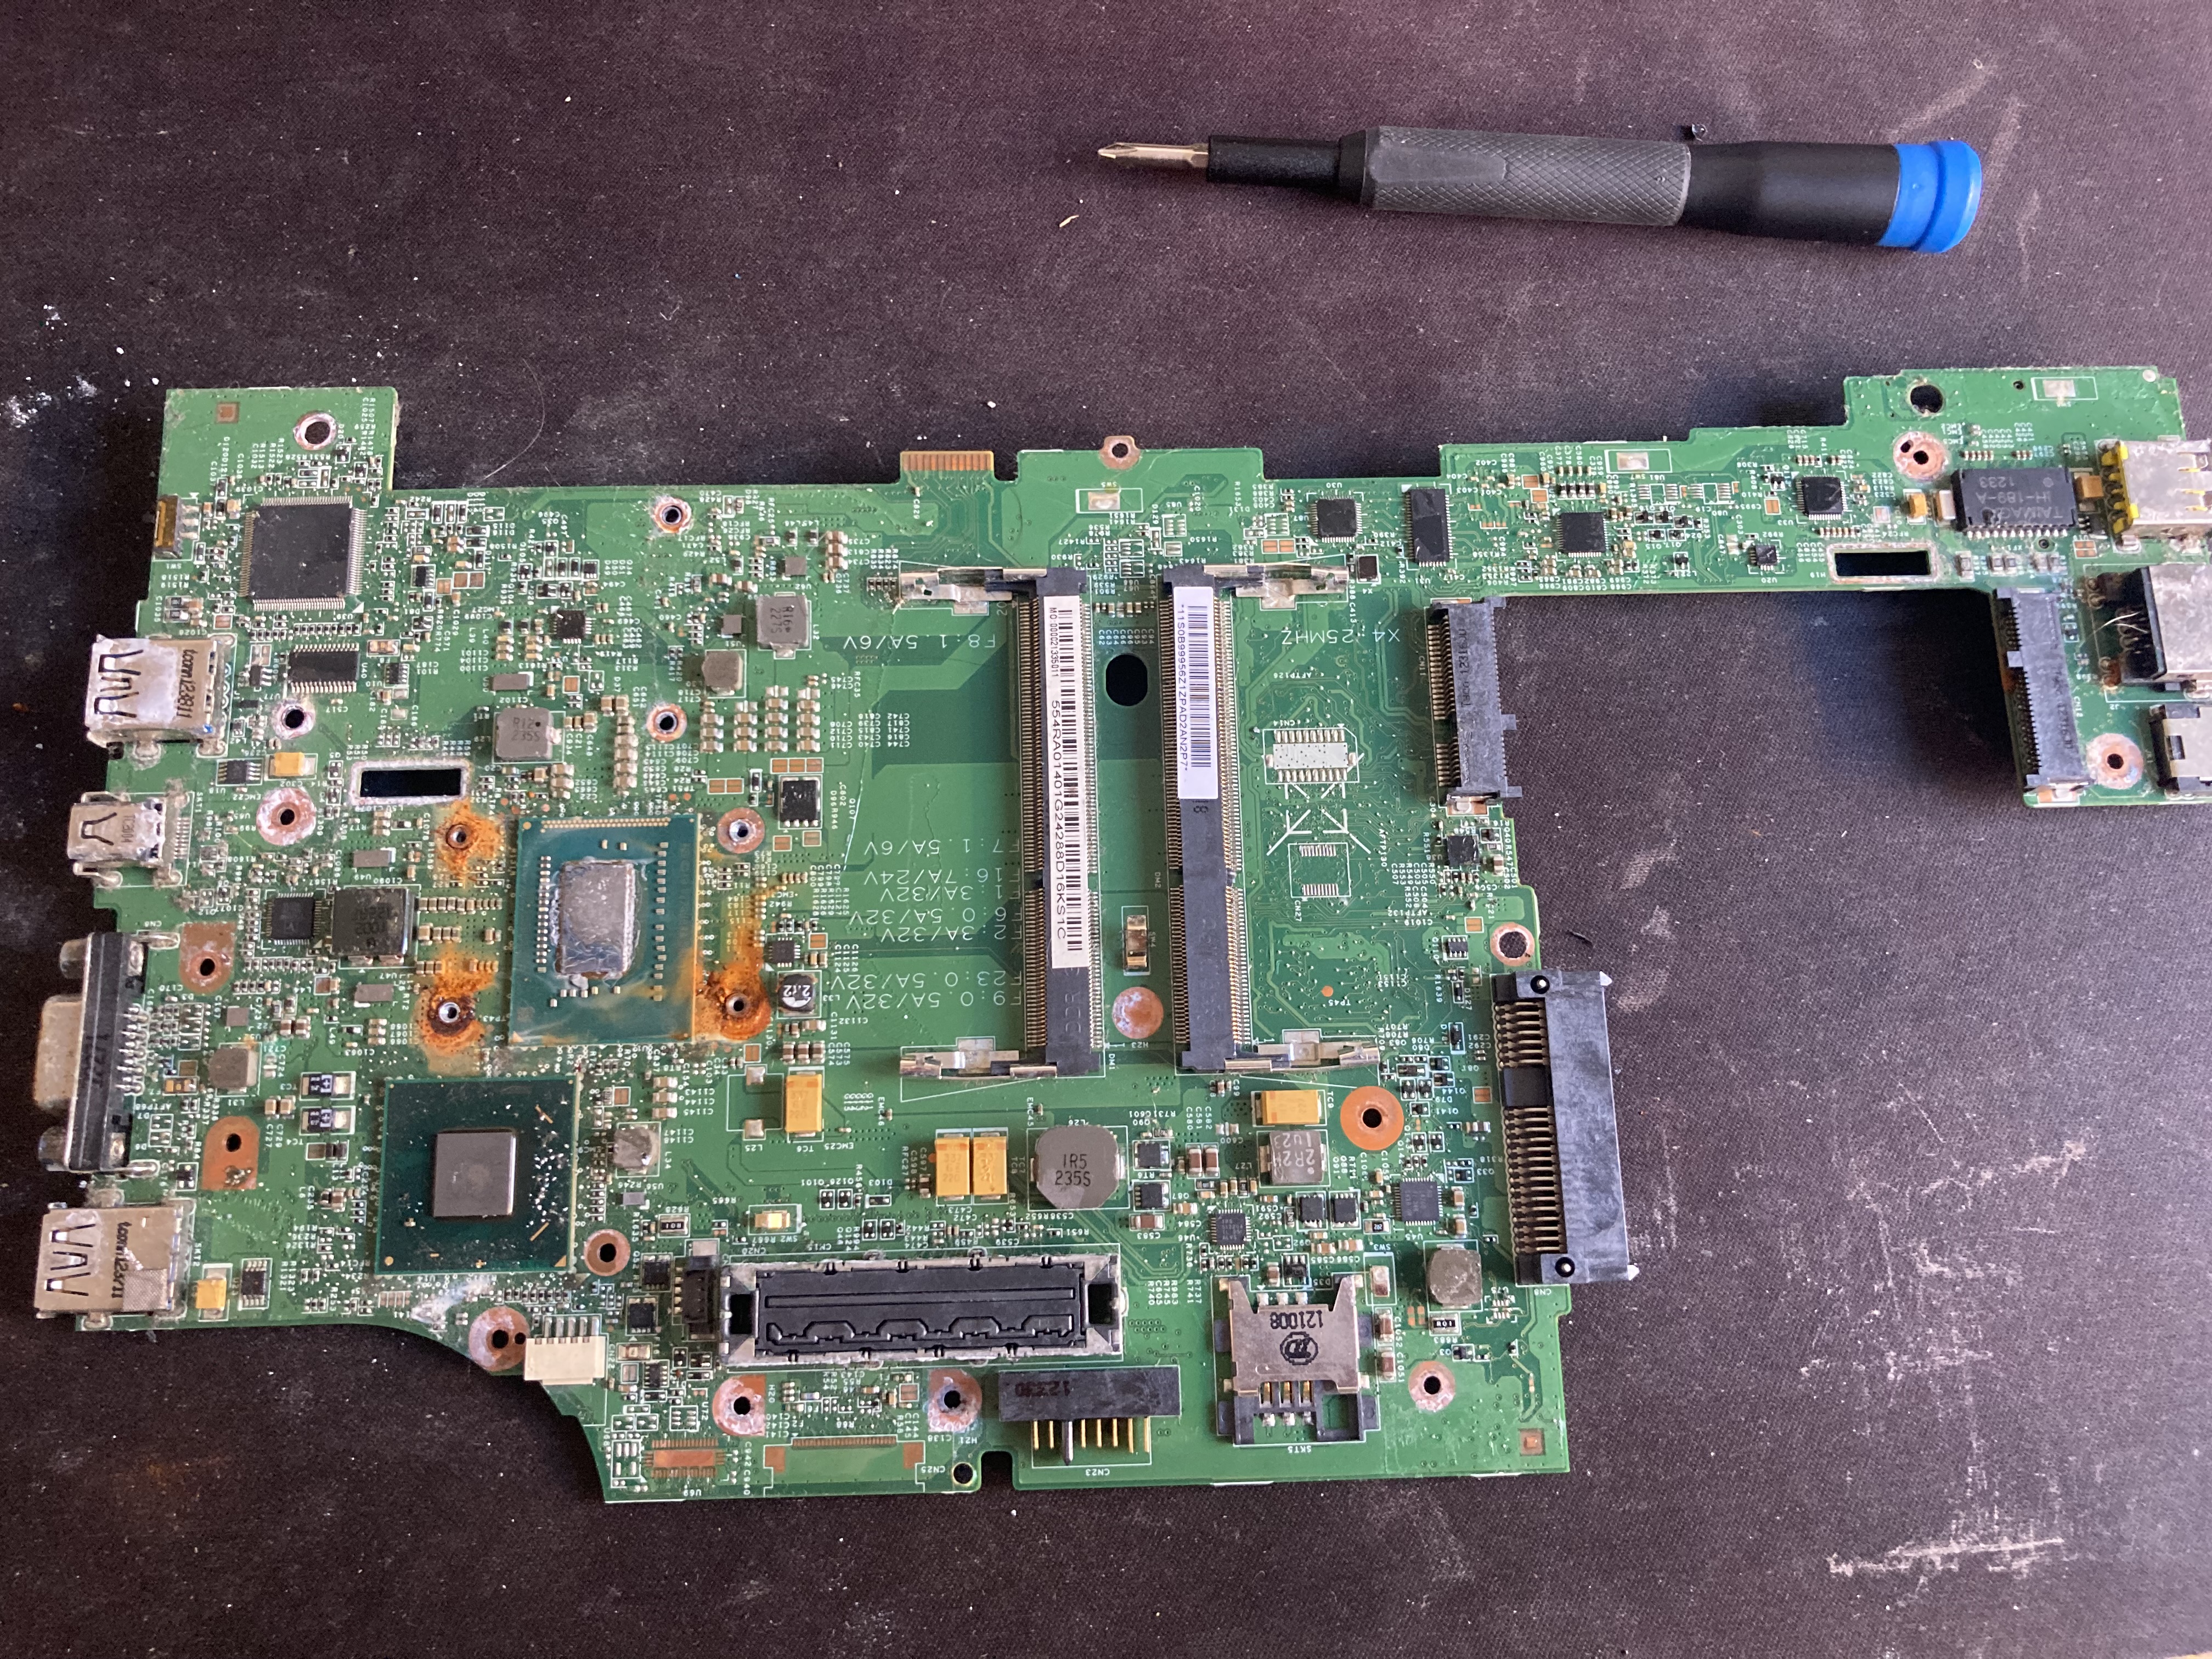 The mainboard of the thinkpad
x230 with rust around the CPU socket and corrosion on the io ports